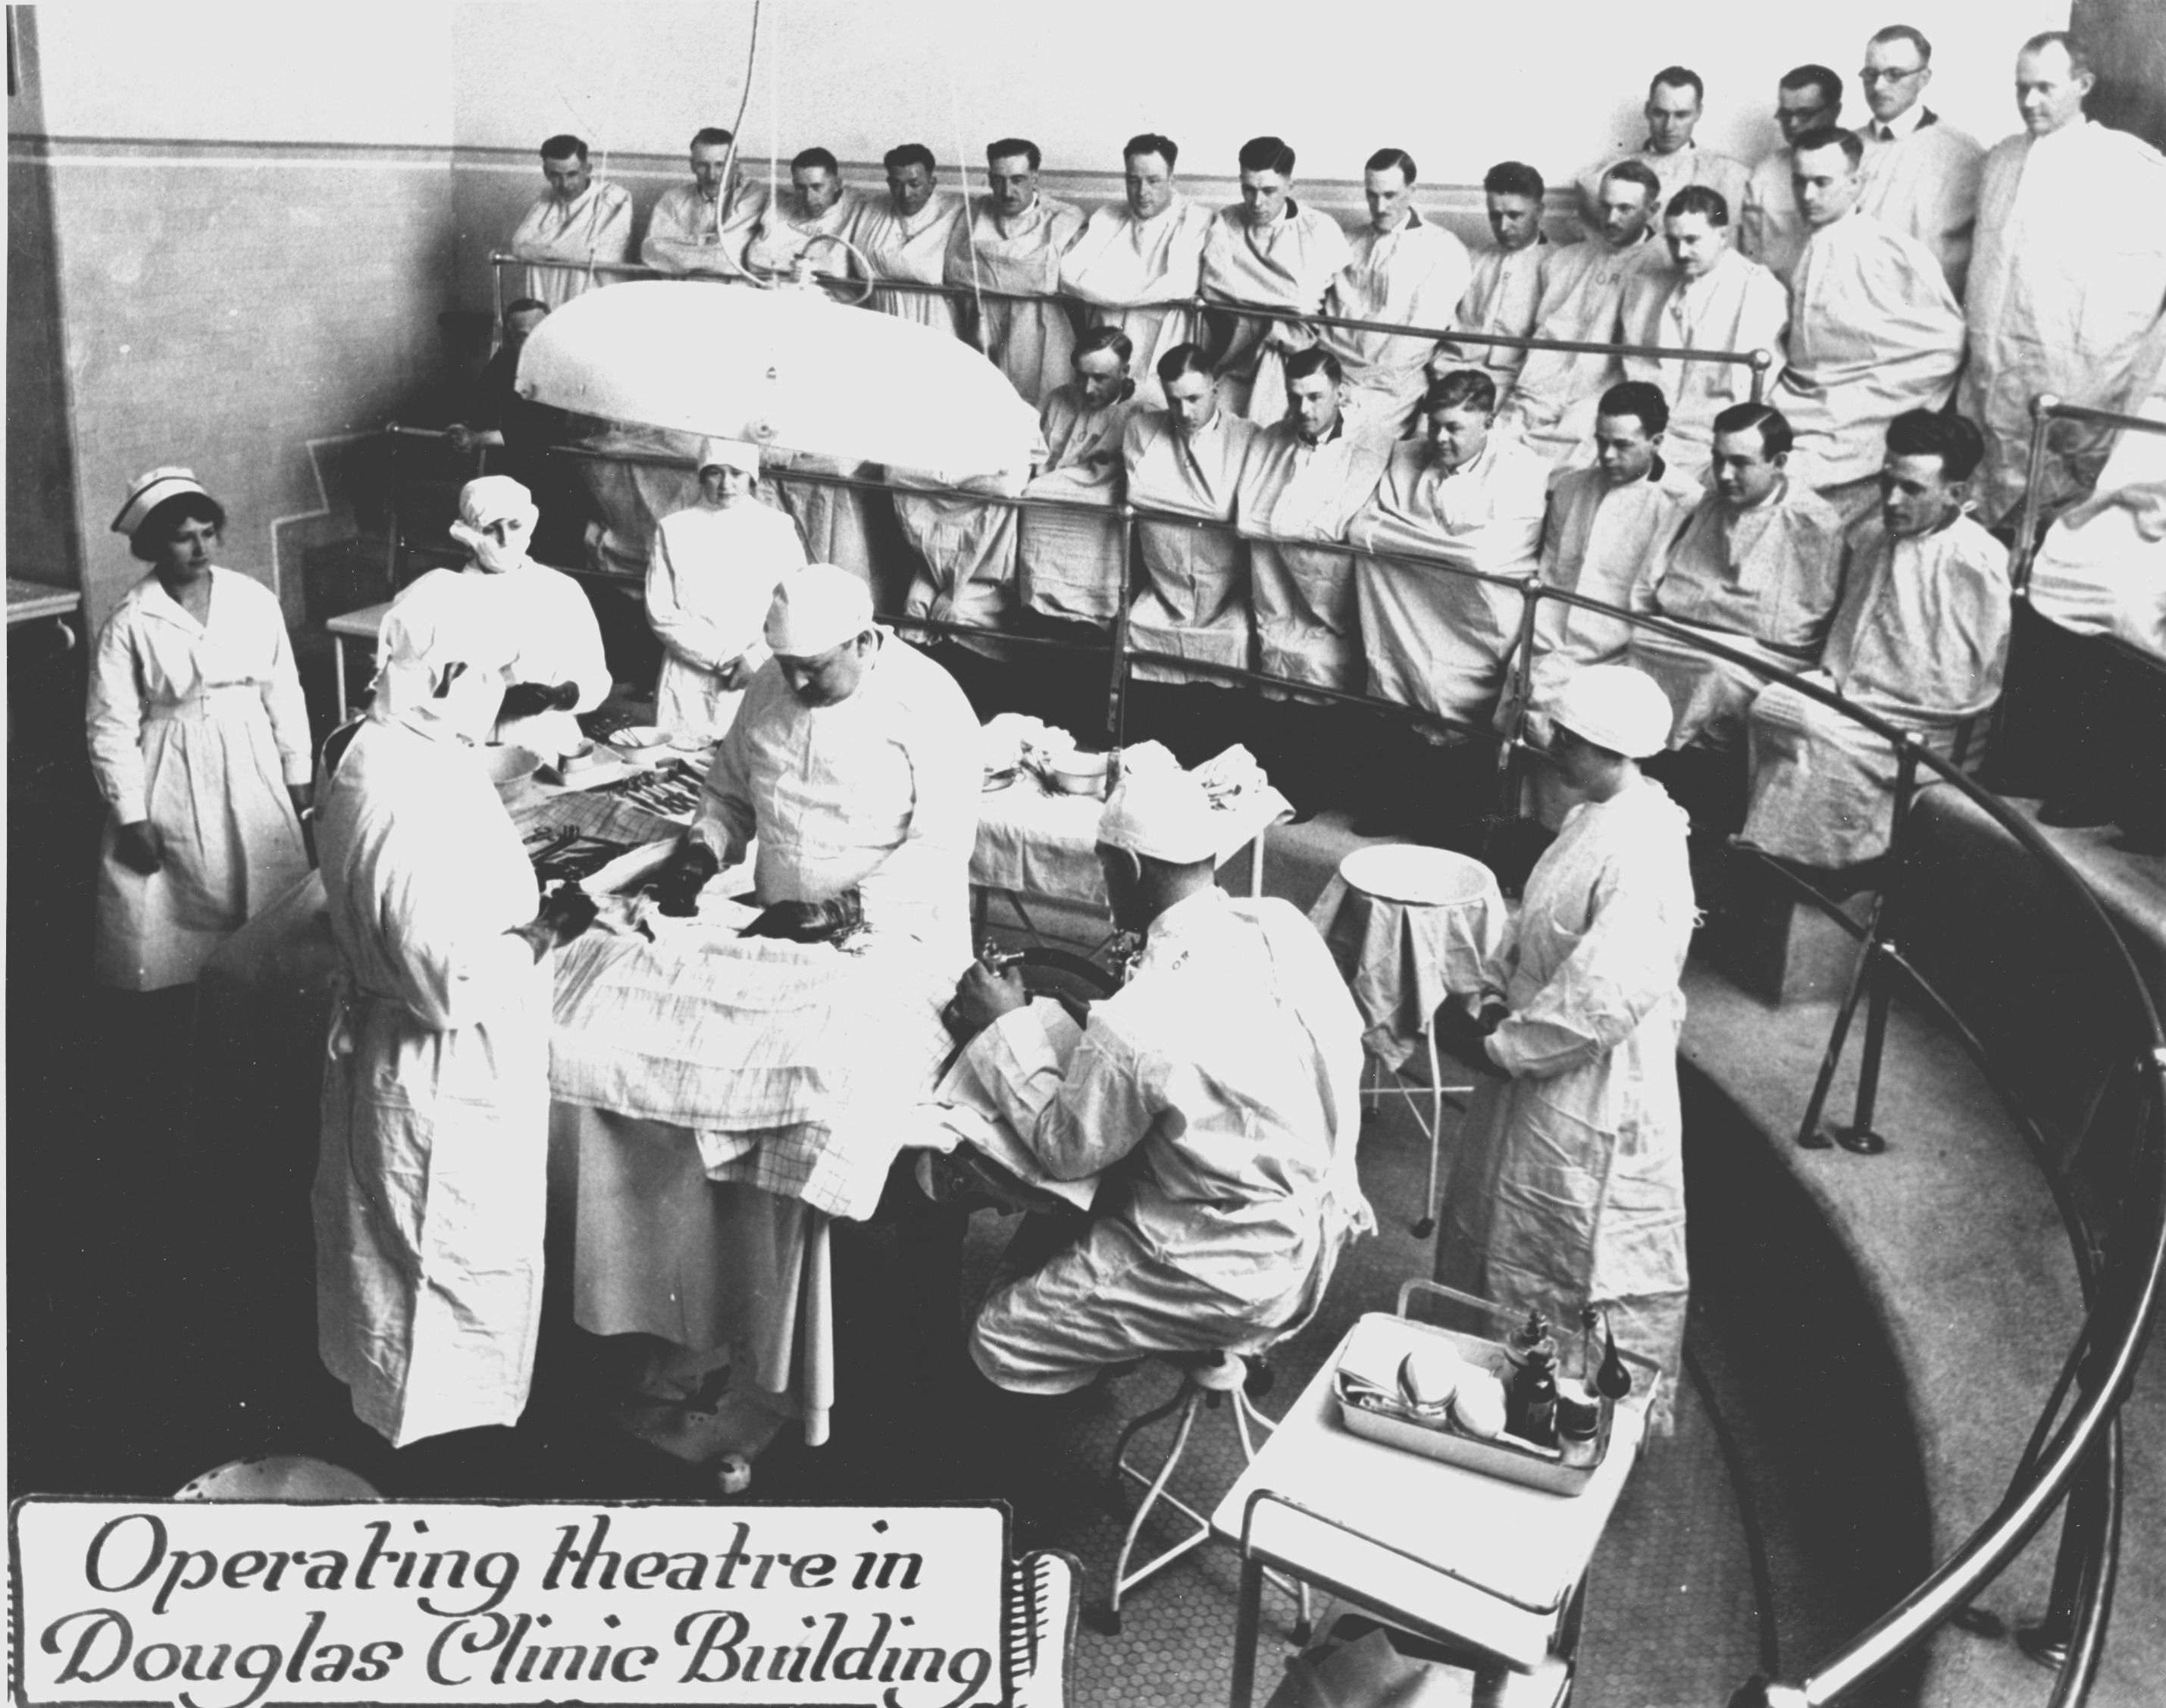 Photograph of doctors and nurses in attendance at the operating theatre, Douglas Clinic Building, 1927